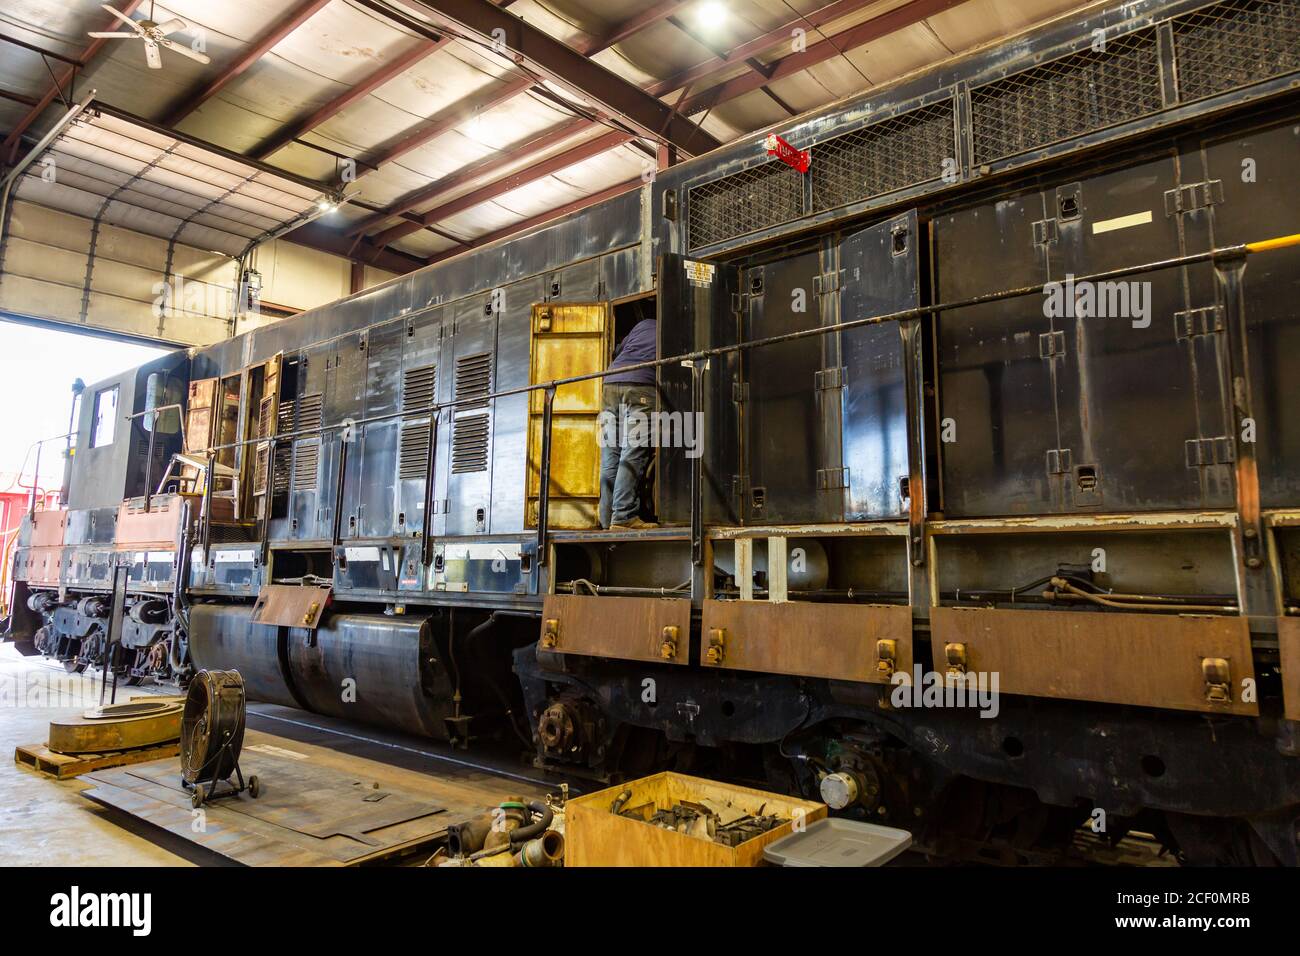 The former Nickel Plate Road's SD9 type diesel electric locomotive 358 undergoes restoration at the Fort Wayne Railroad Historical Society's workshop. Stock Photo